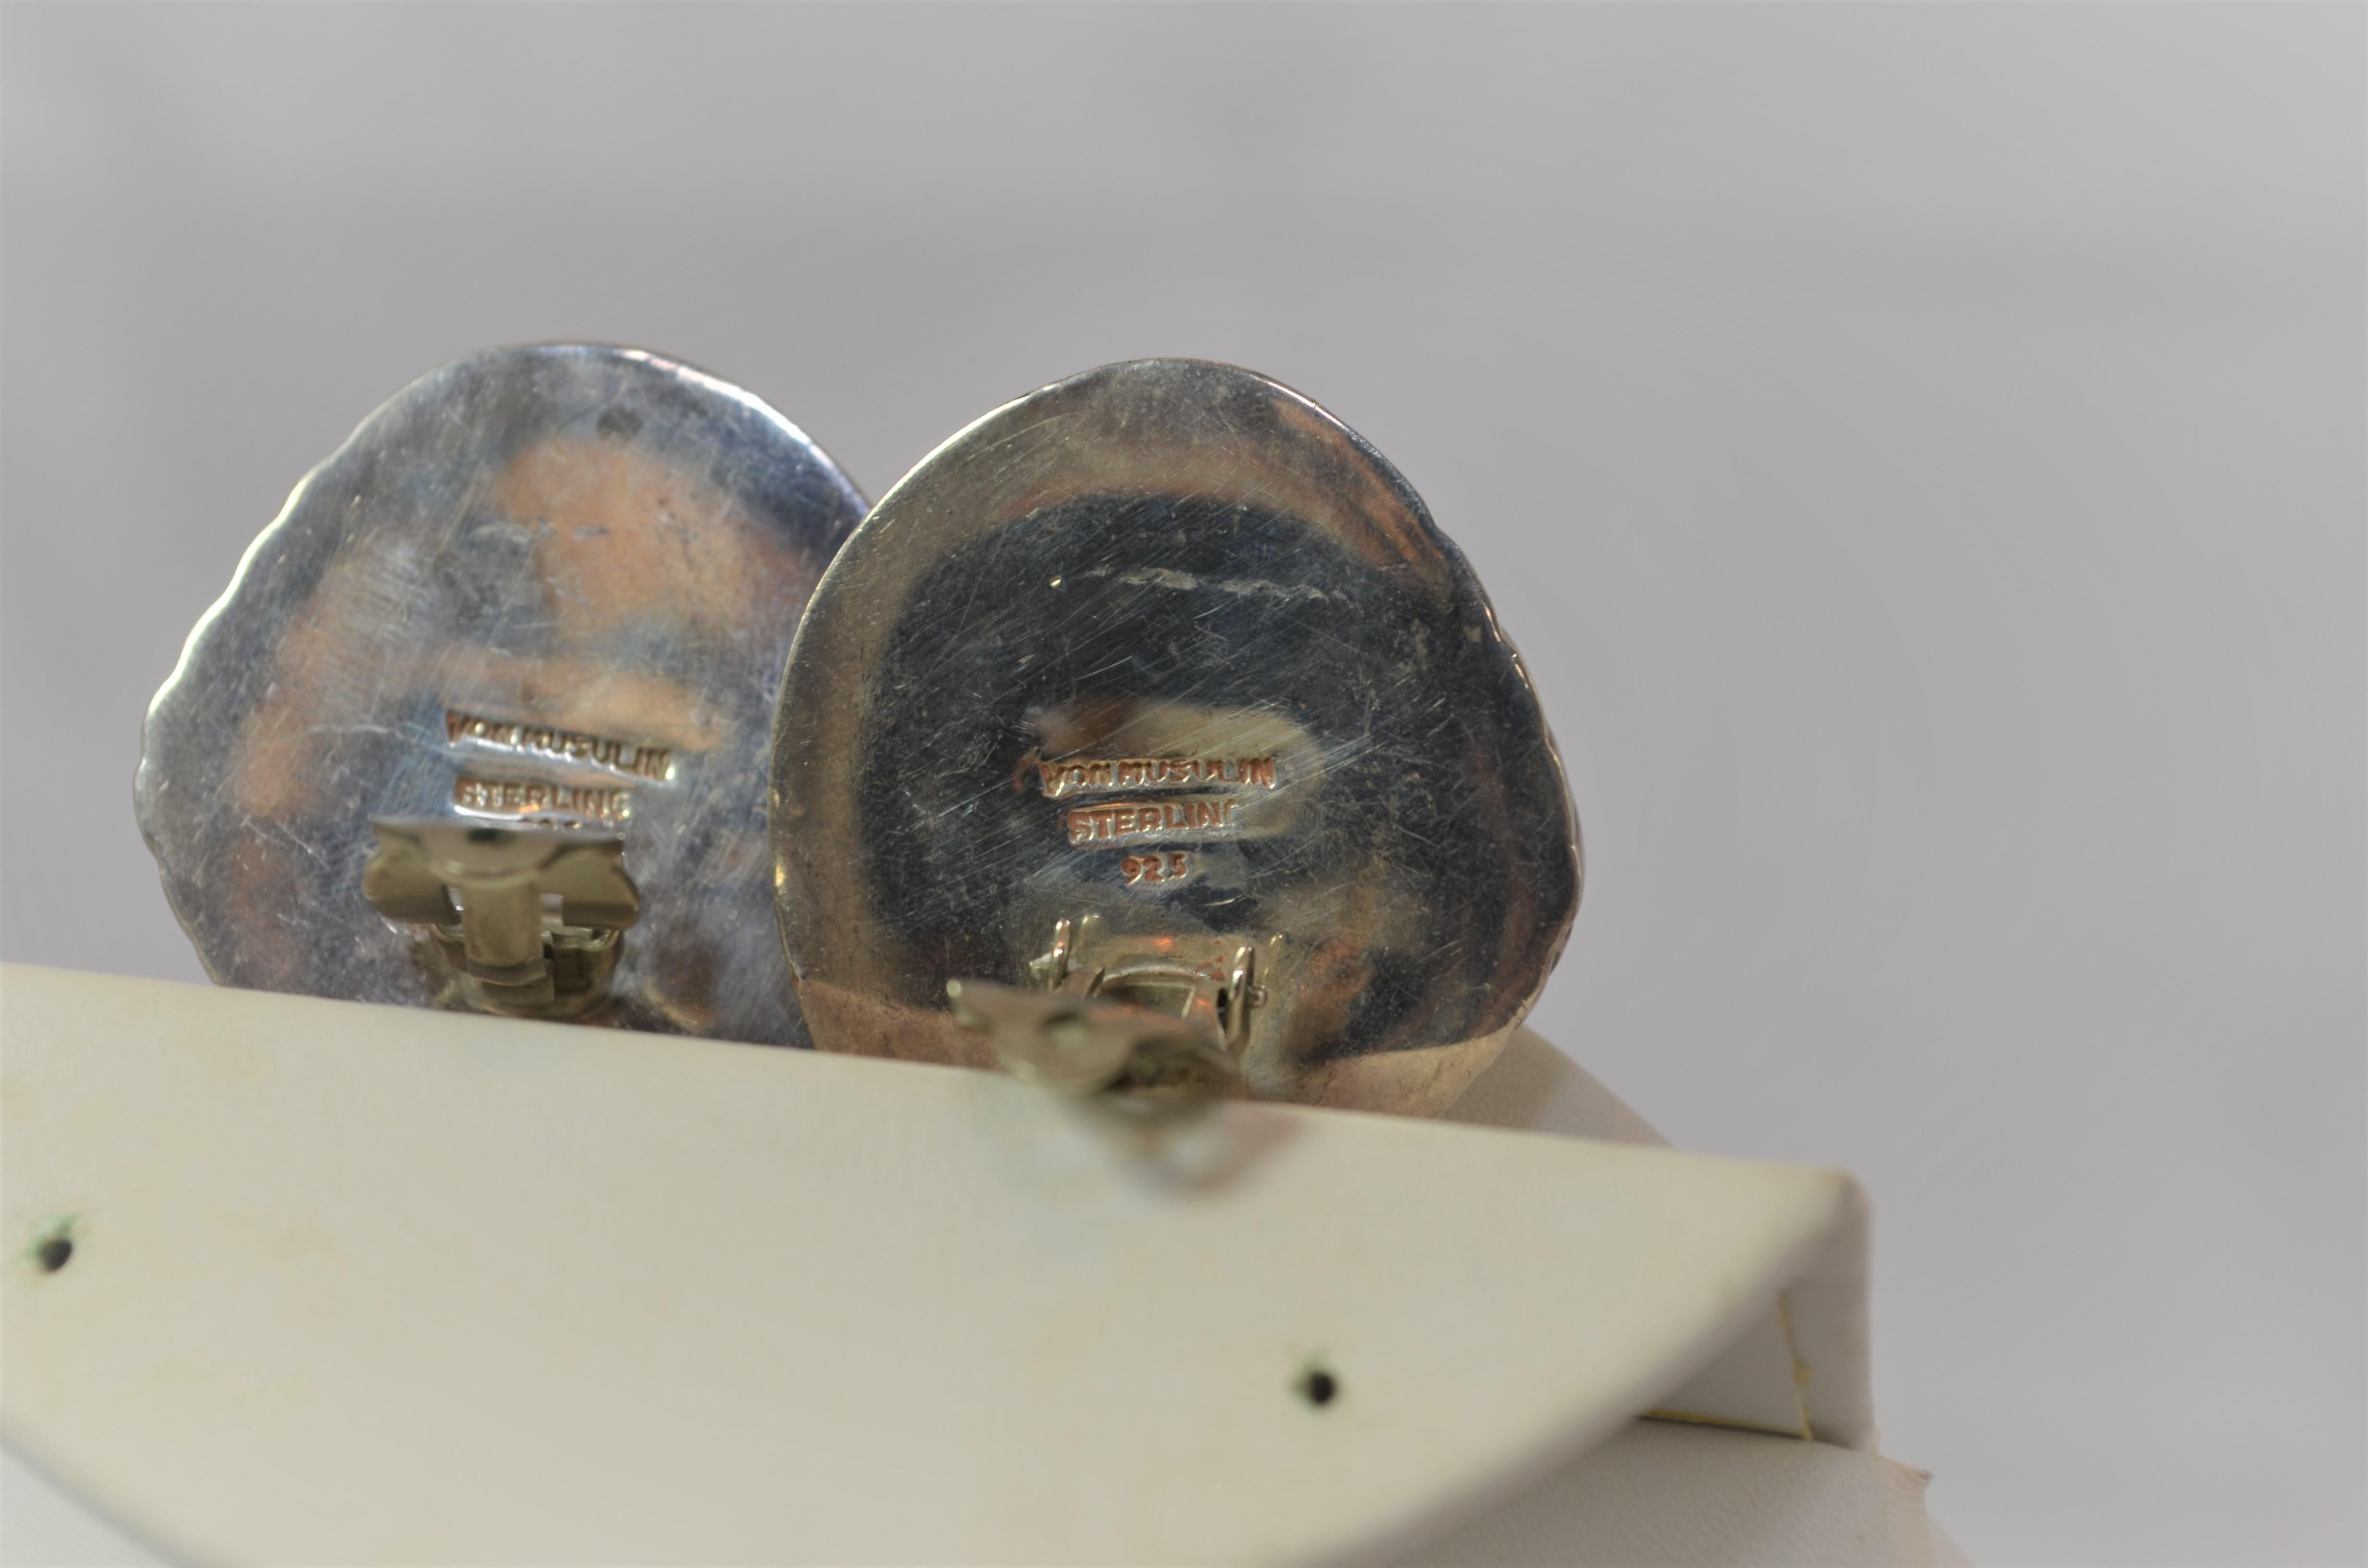 Patricia Von Muslin Signed Sterling Silver Shell Earrings In Excellent Condition For Sale In Carmel, CA